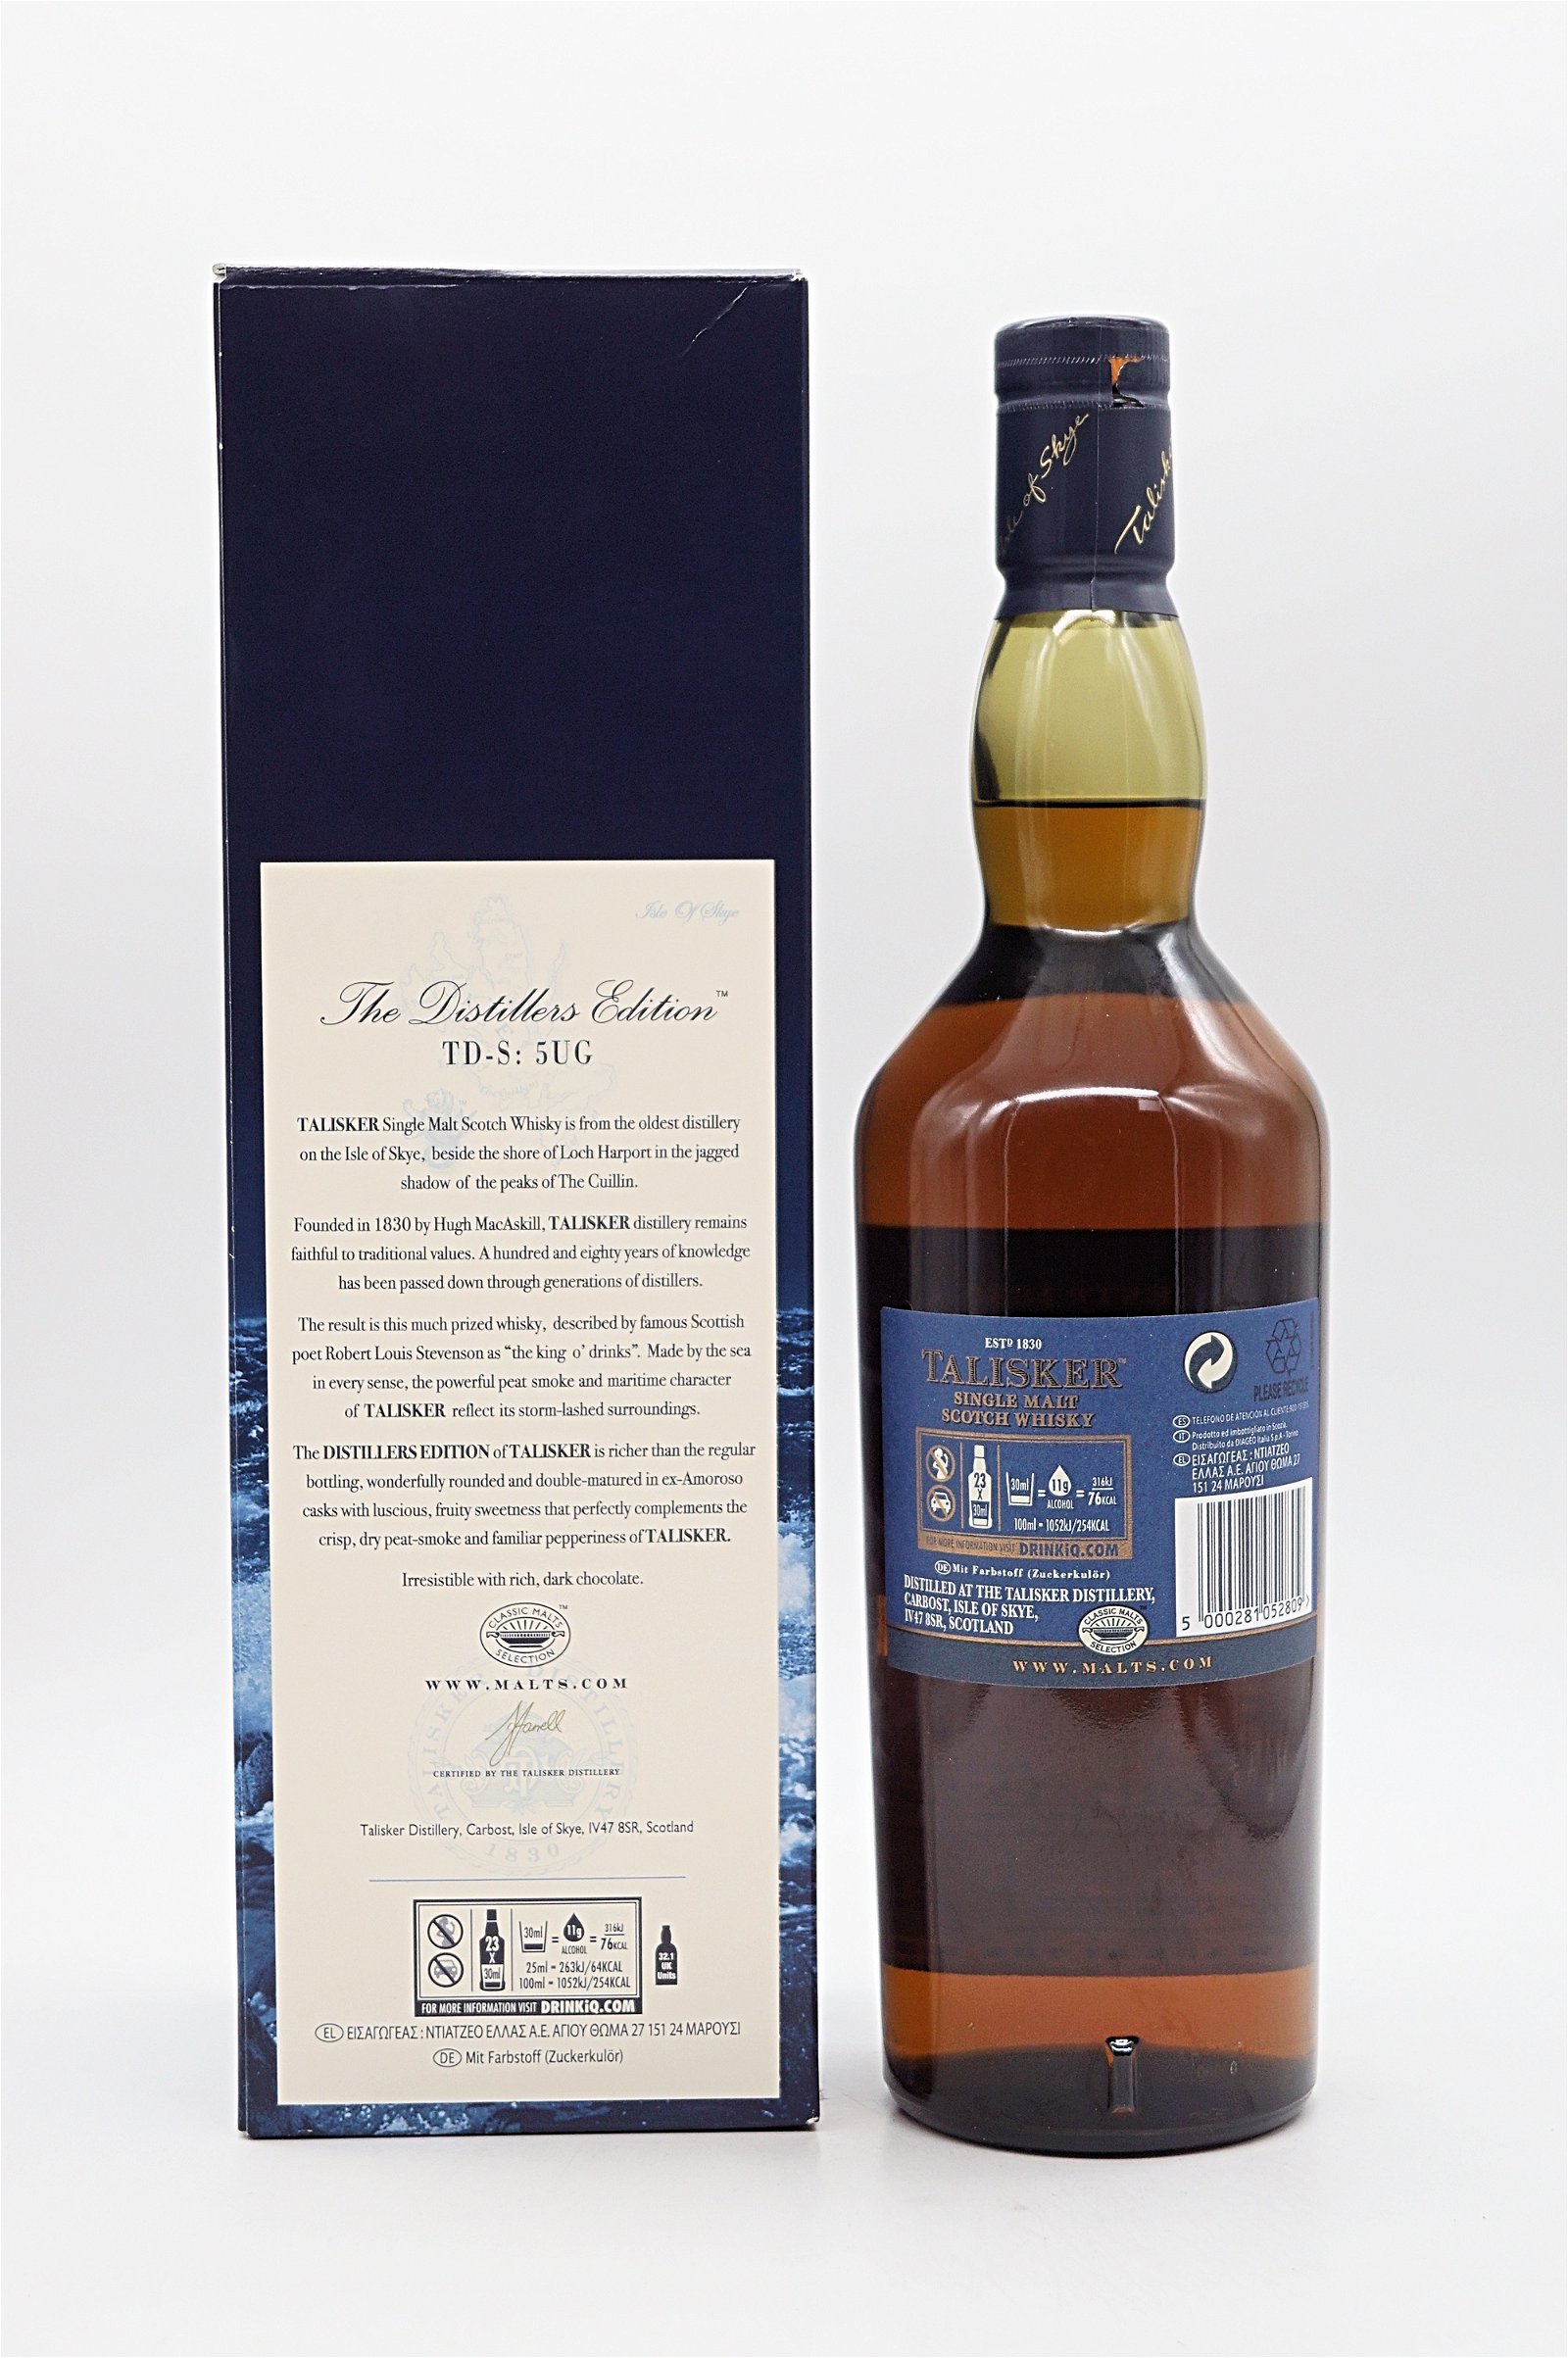 Talisker The Distillers Edition 2008/2018 Double Matured in Amoroso Cask Wood Single Malt Scotch Whisky